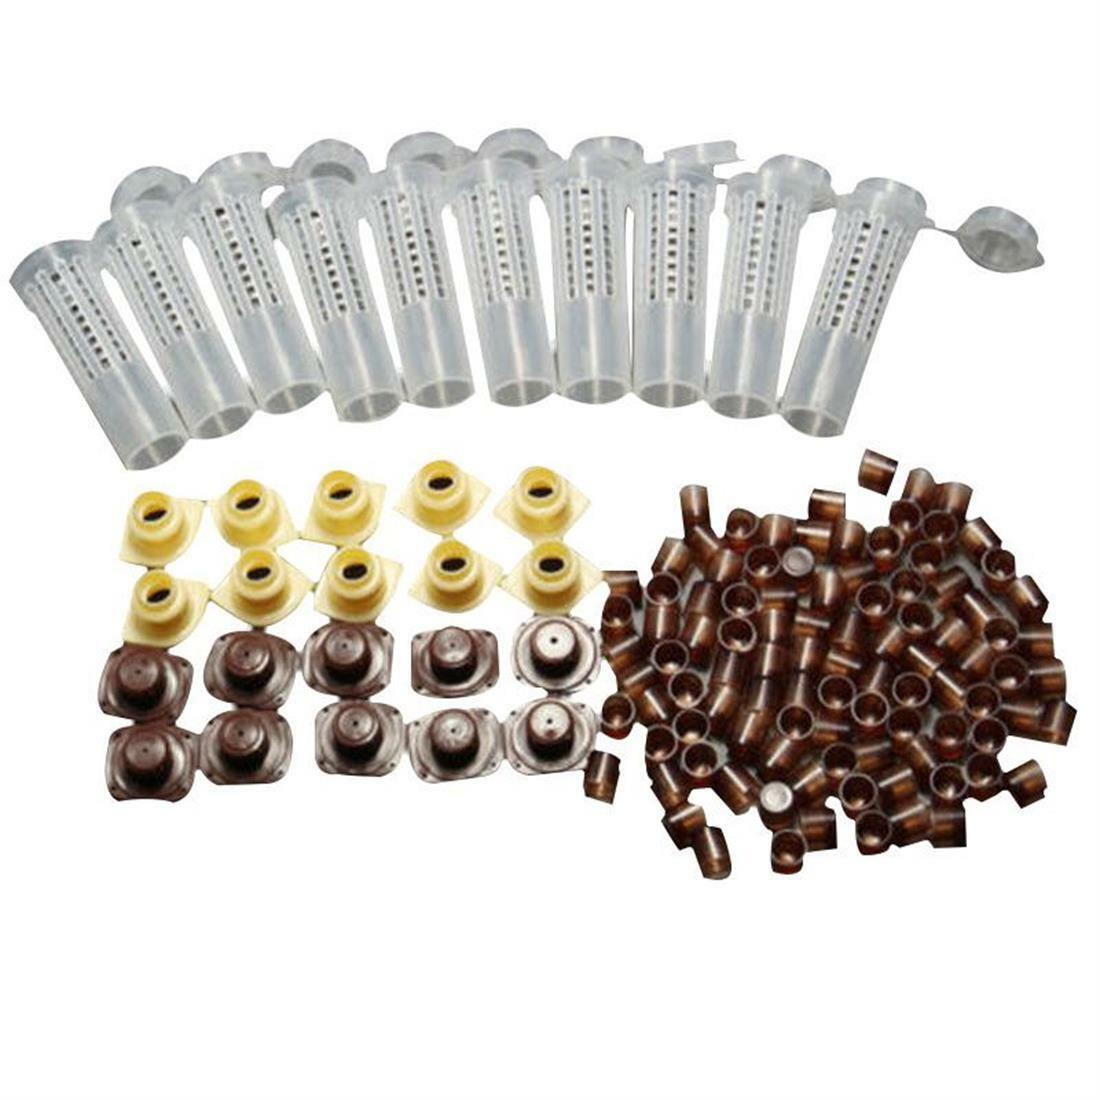 Complete Queen Rearing Cupkit System Bee Beekeeping Catcher Box & 100 Cups Cell